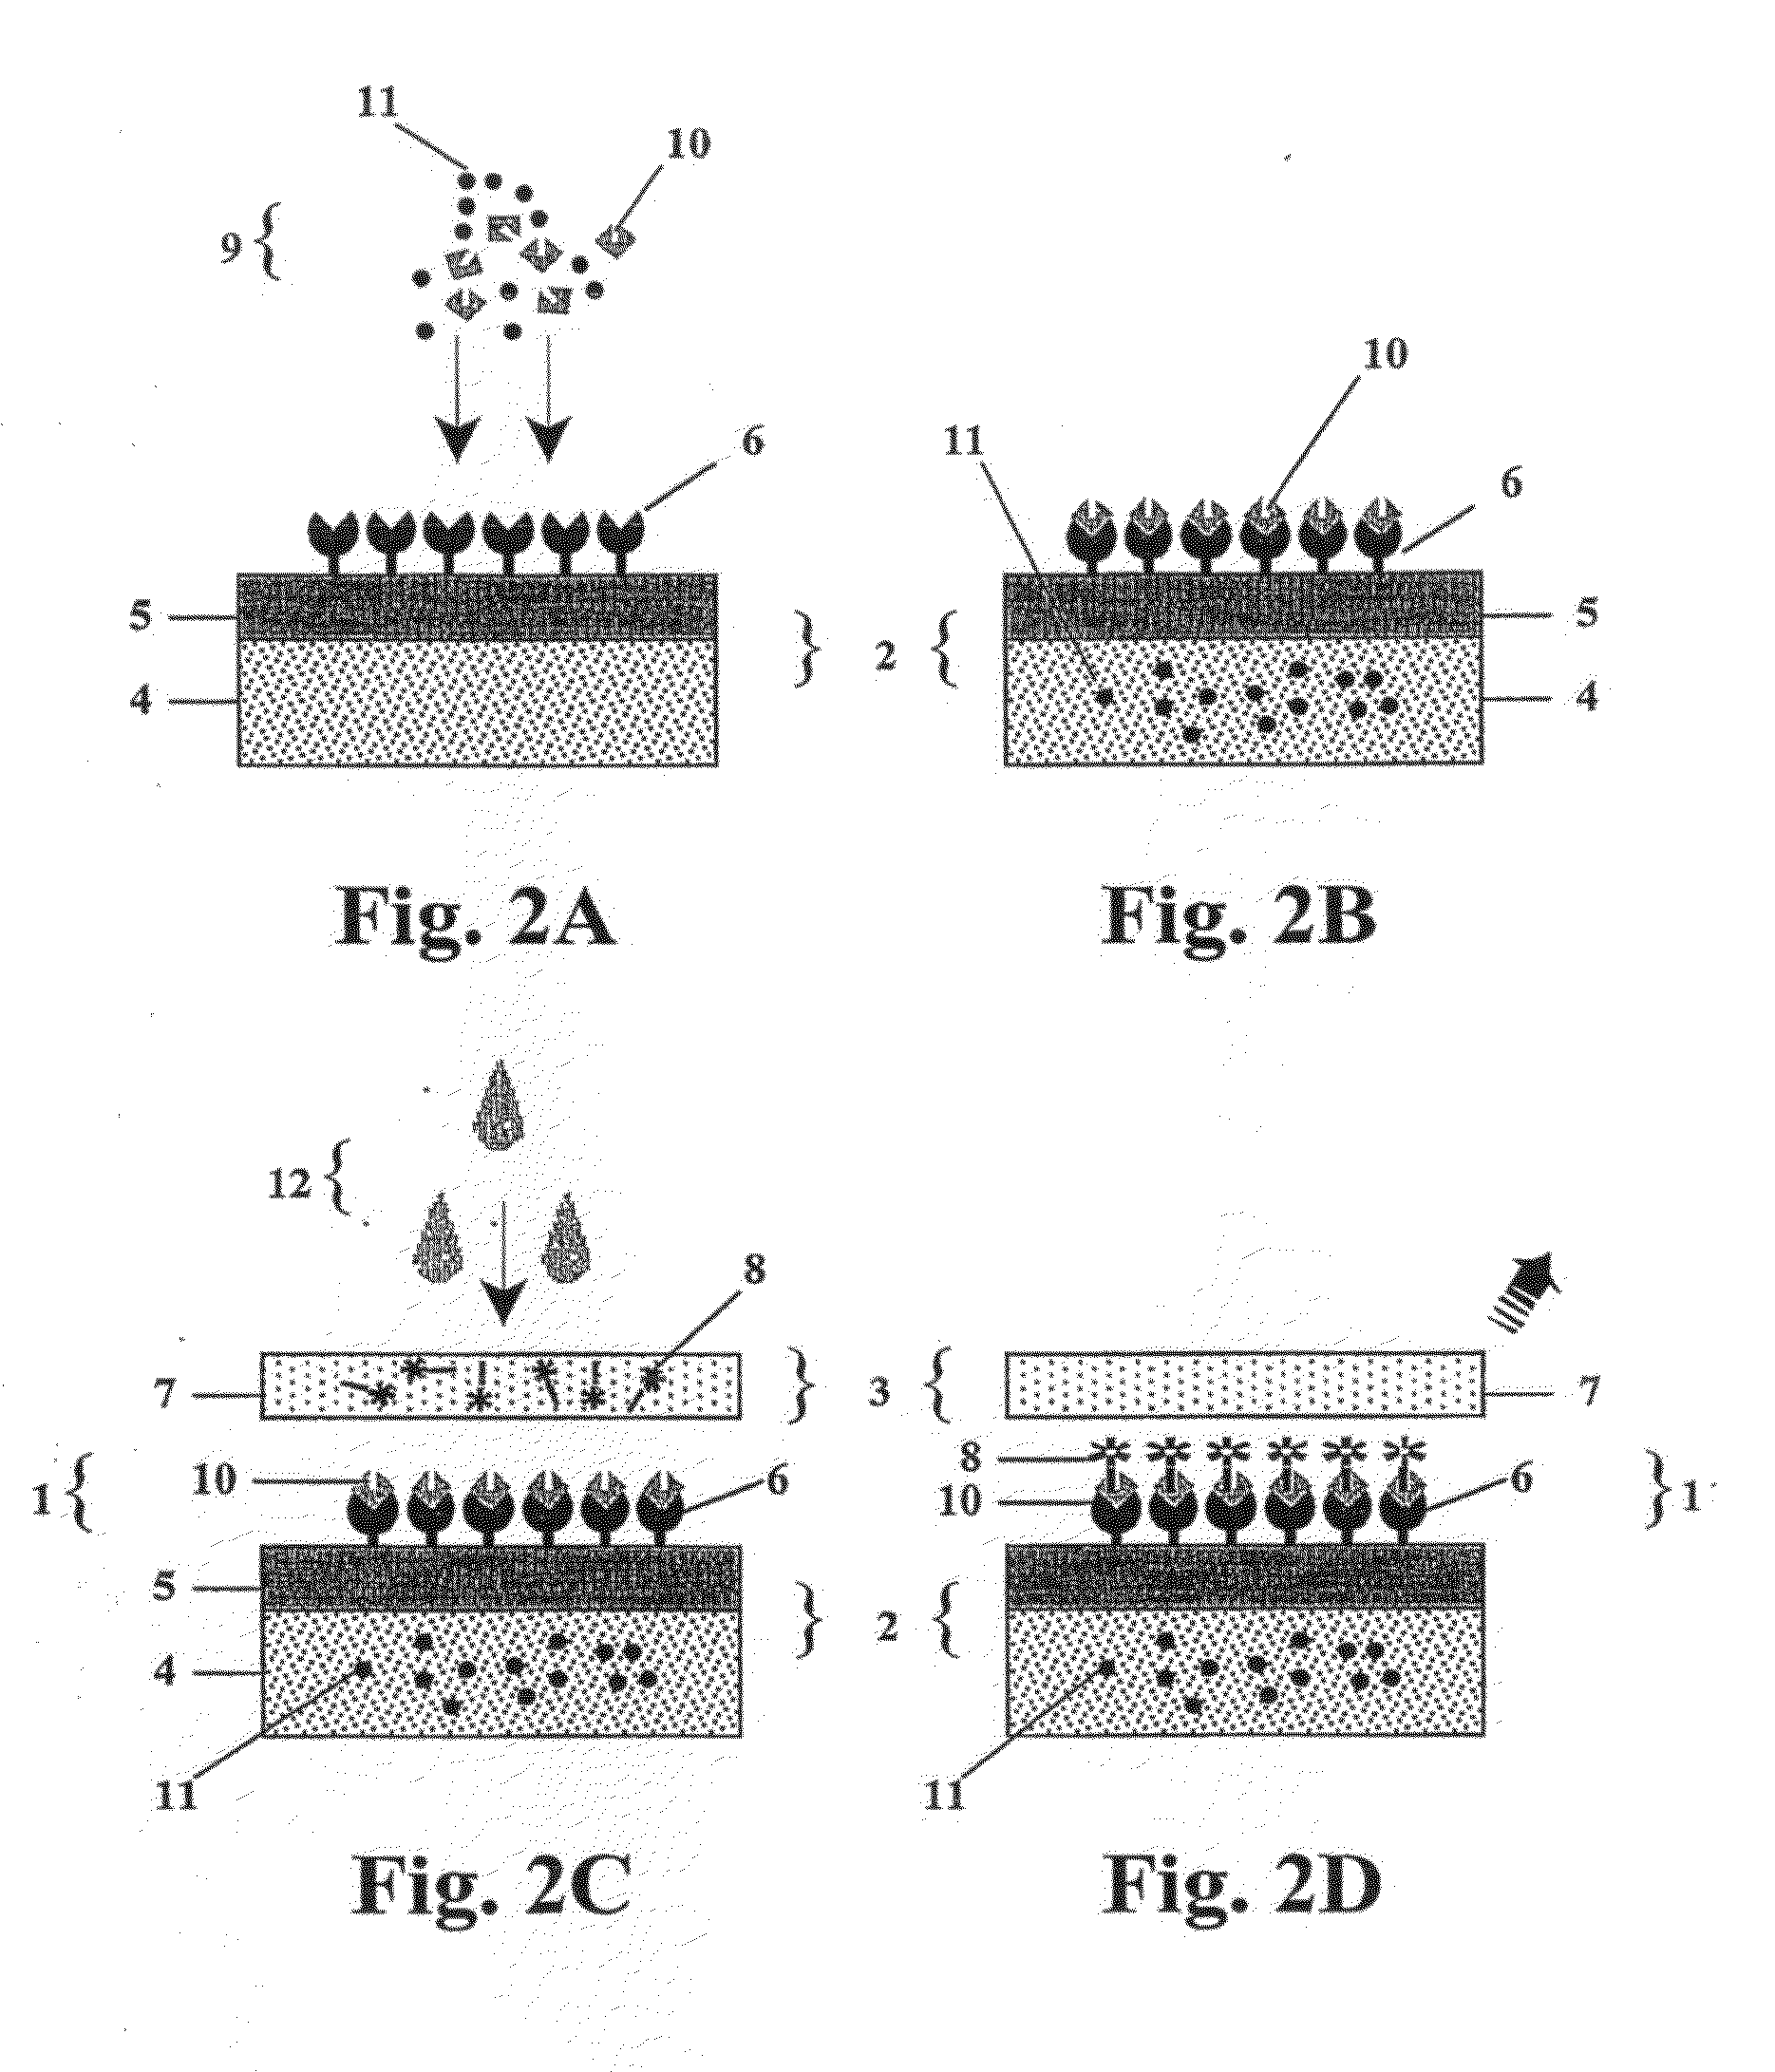 Rapid diagnostic device, assay and multifunctional buffer